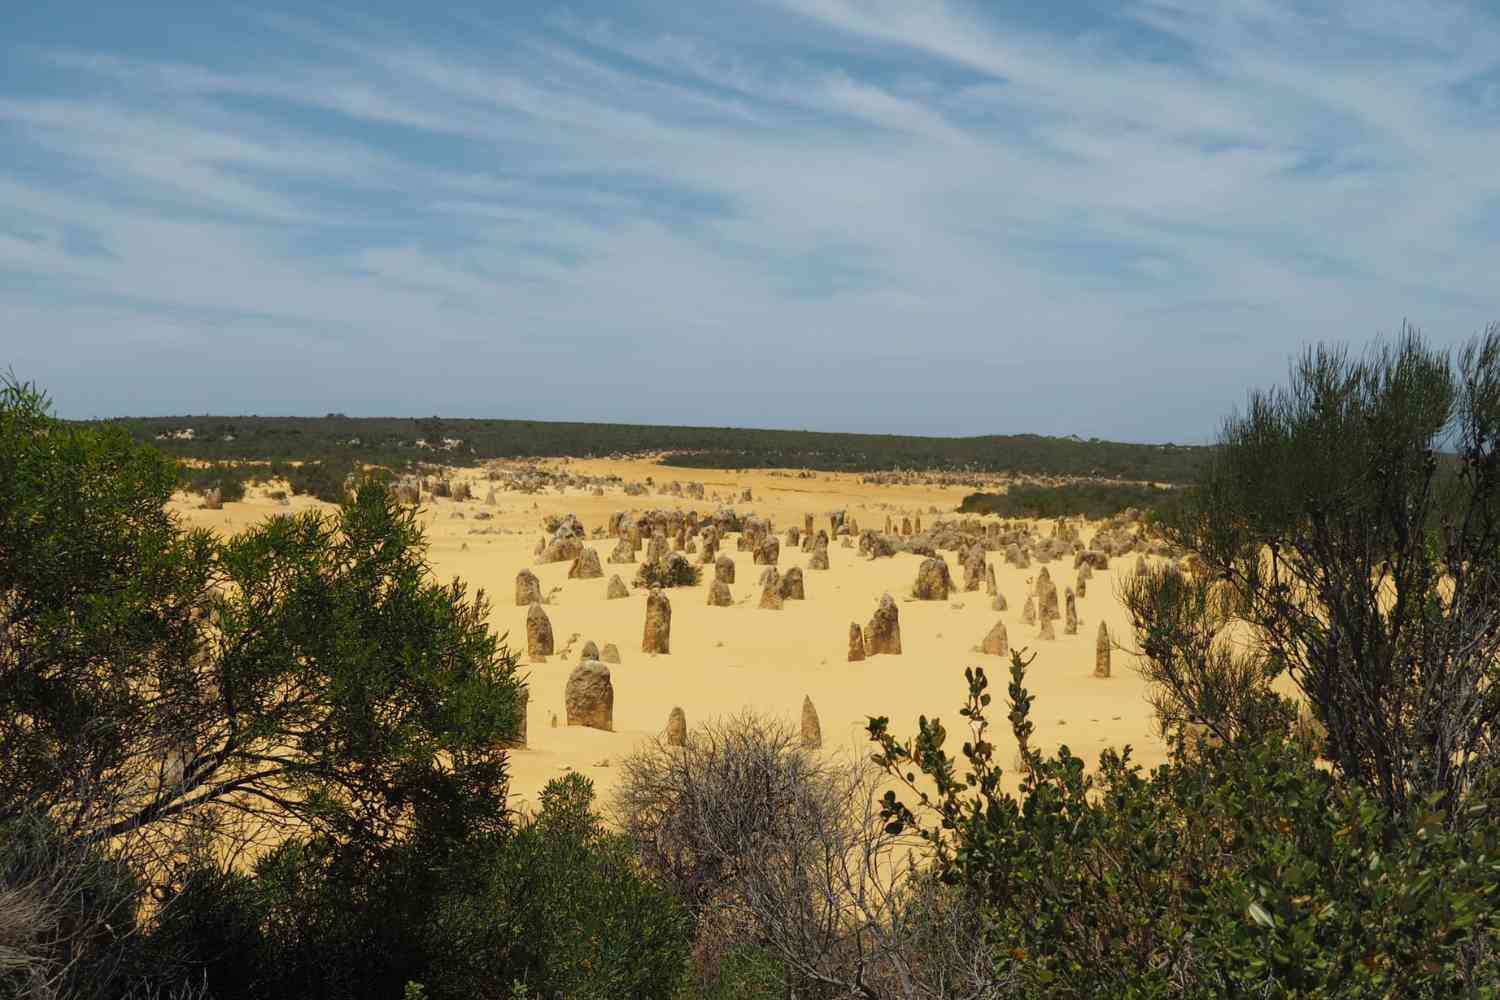 Looking across the Pinnacles Desert at the many spires